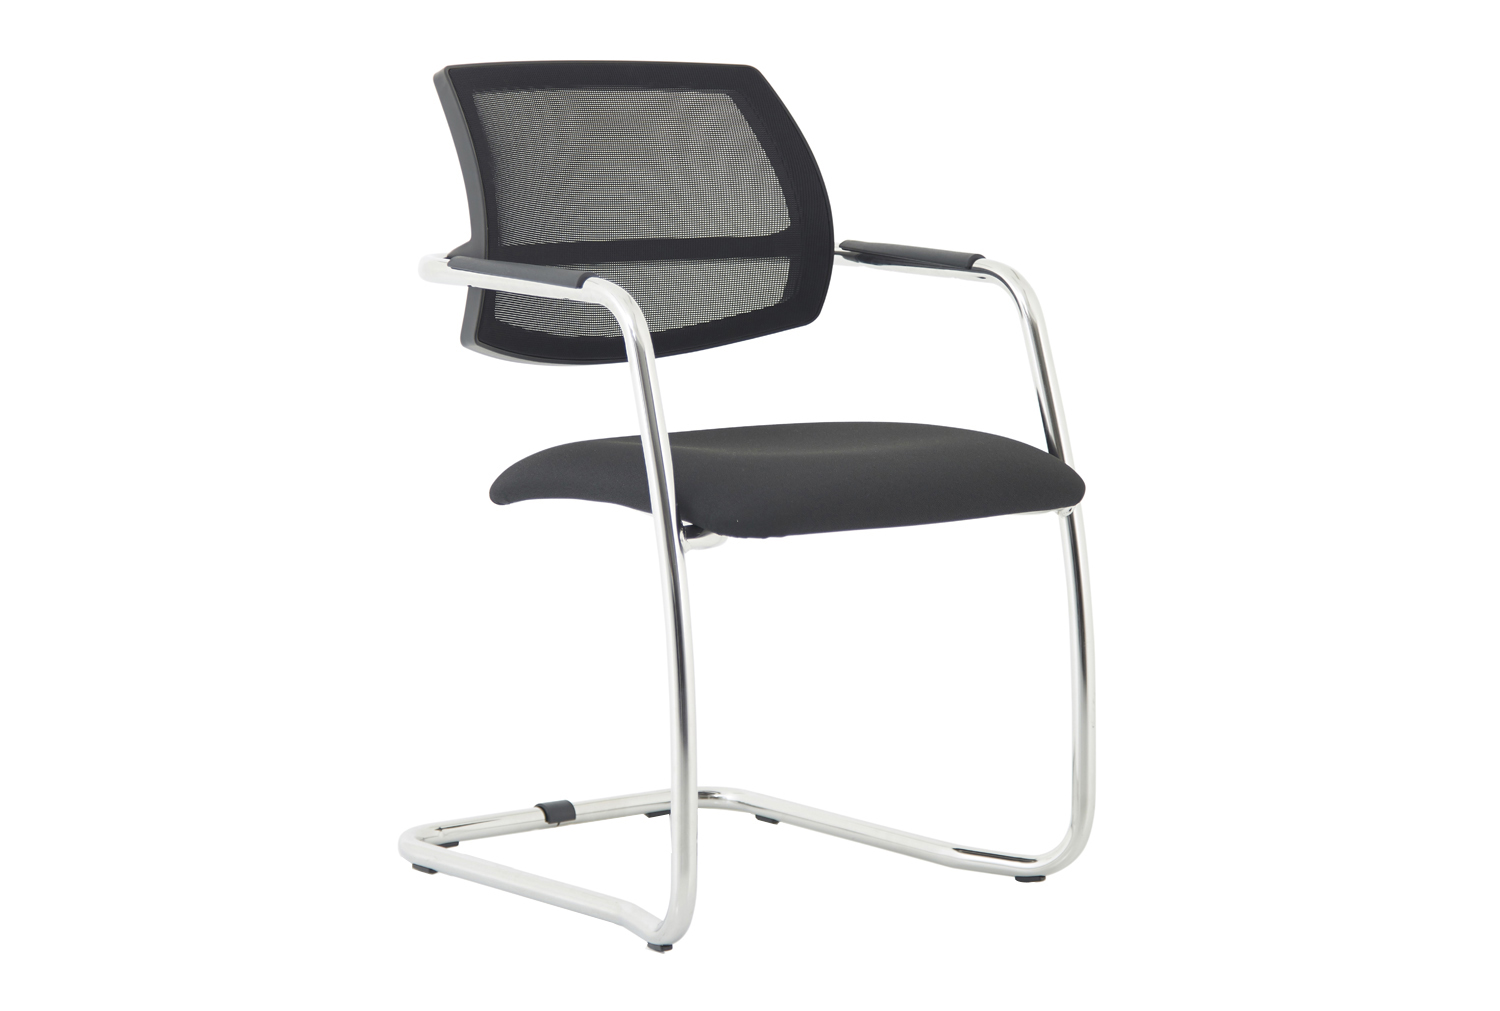 Asura Mesh Back Stacking Cantilever Office Chair, Black, Express Delivery